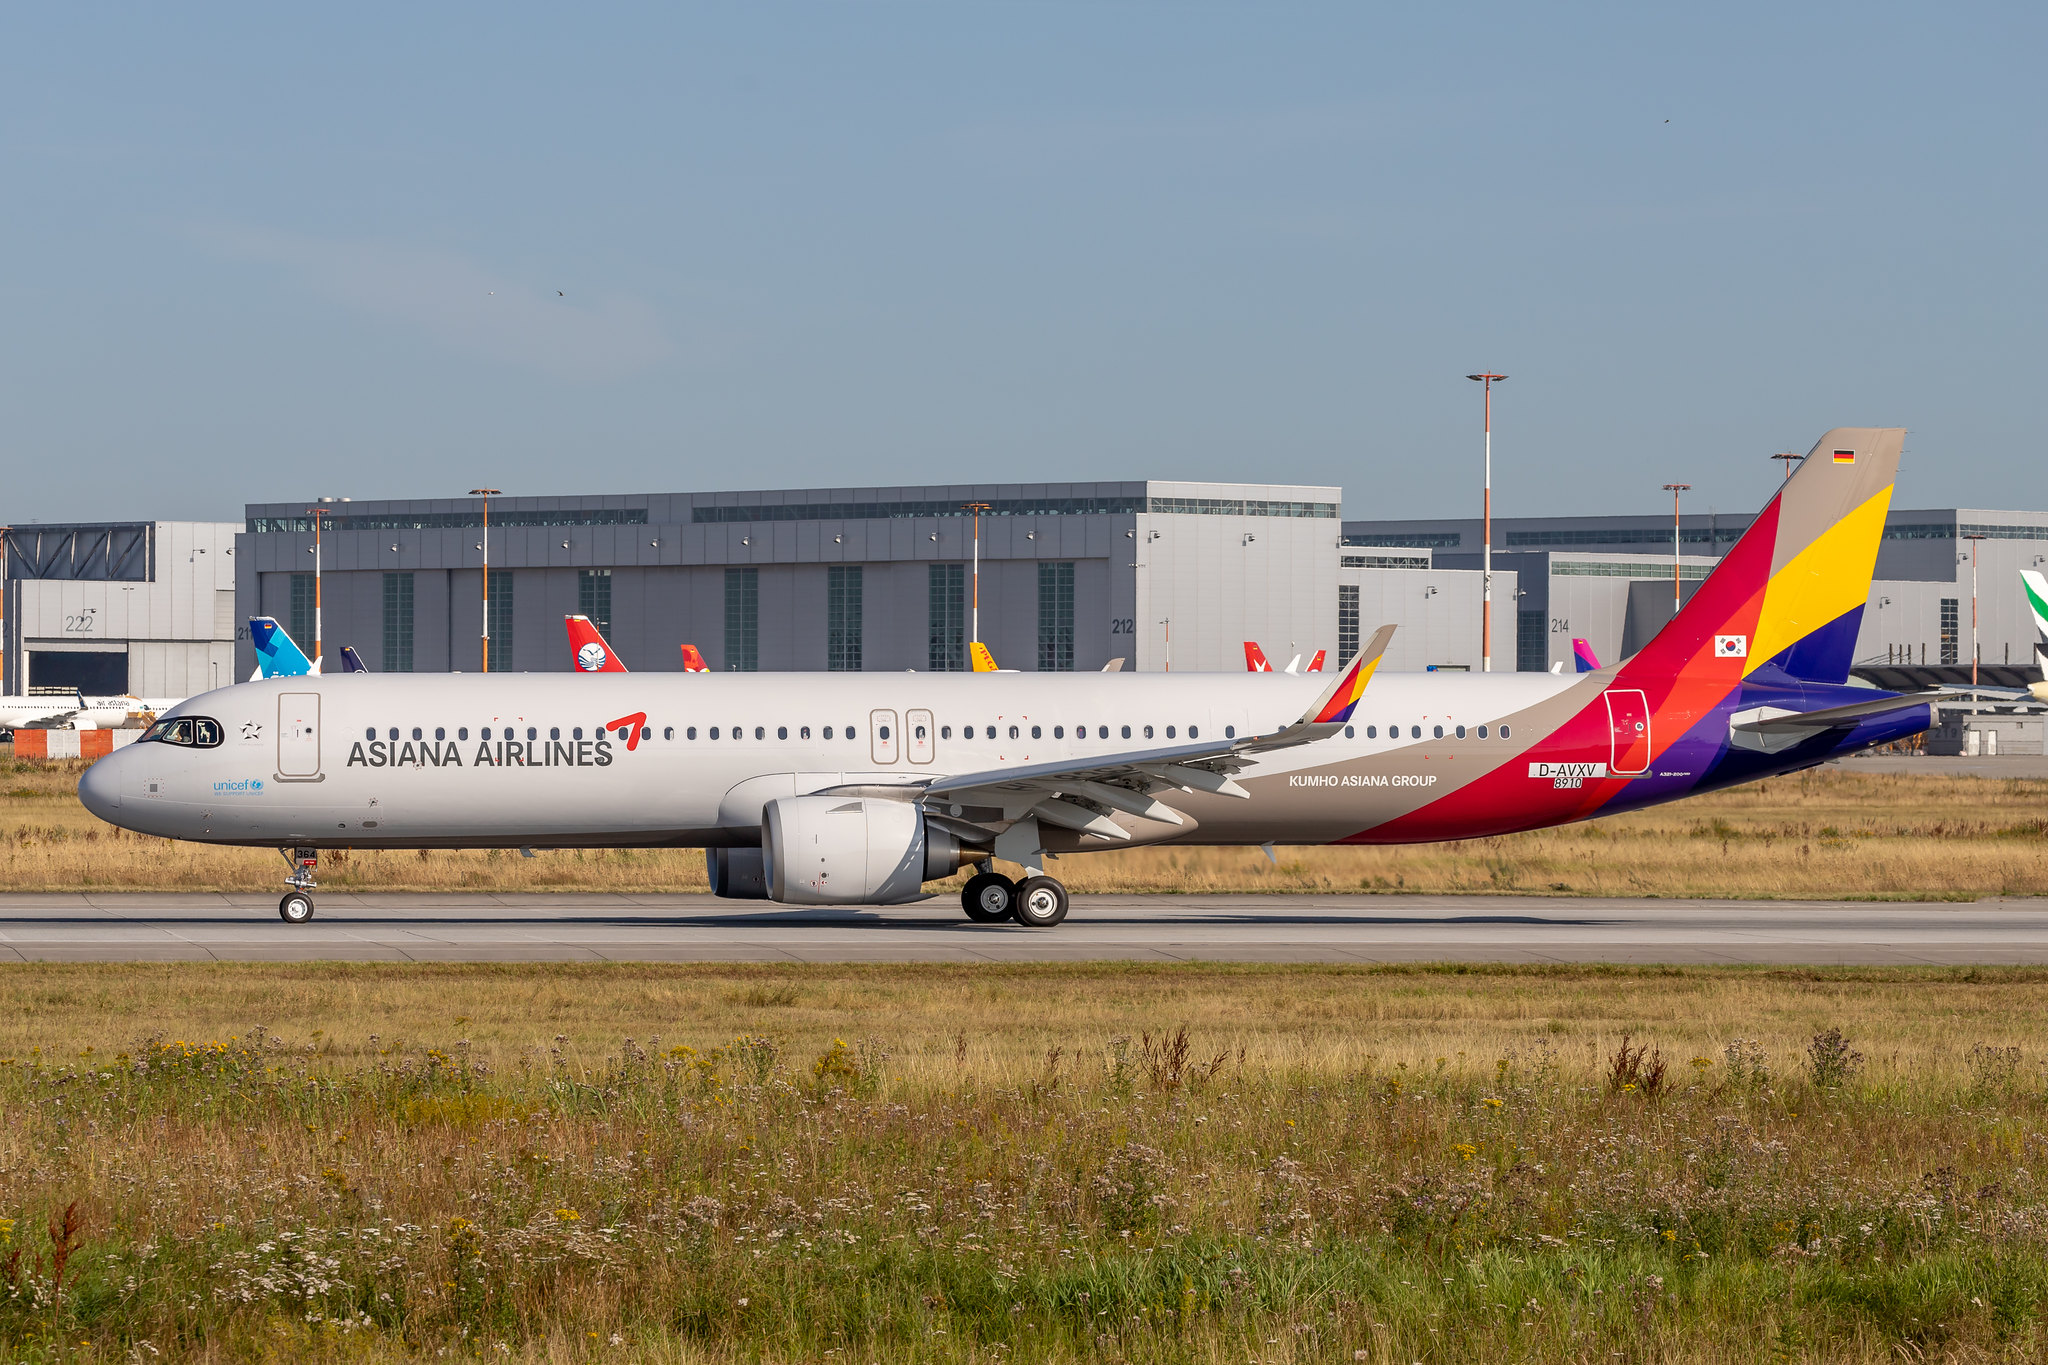 A321-252NX, Asiana Airlines, D-AVXV 